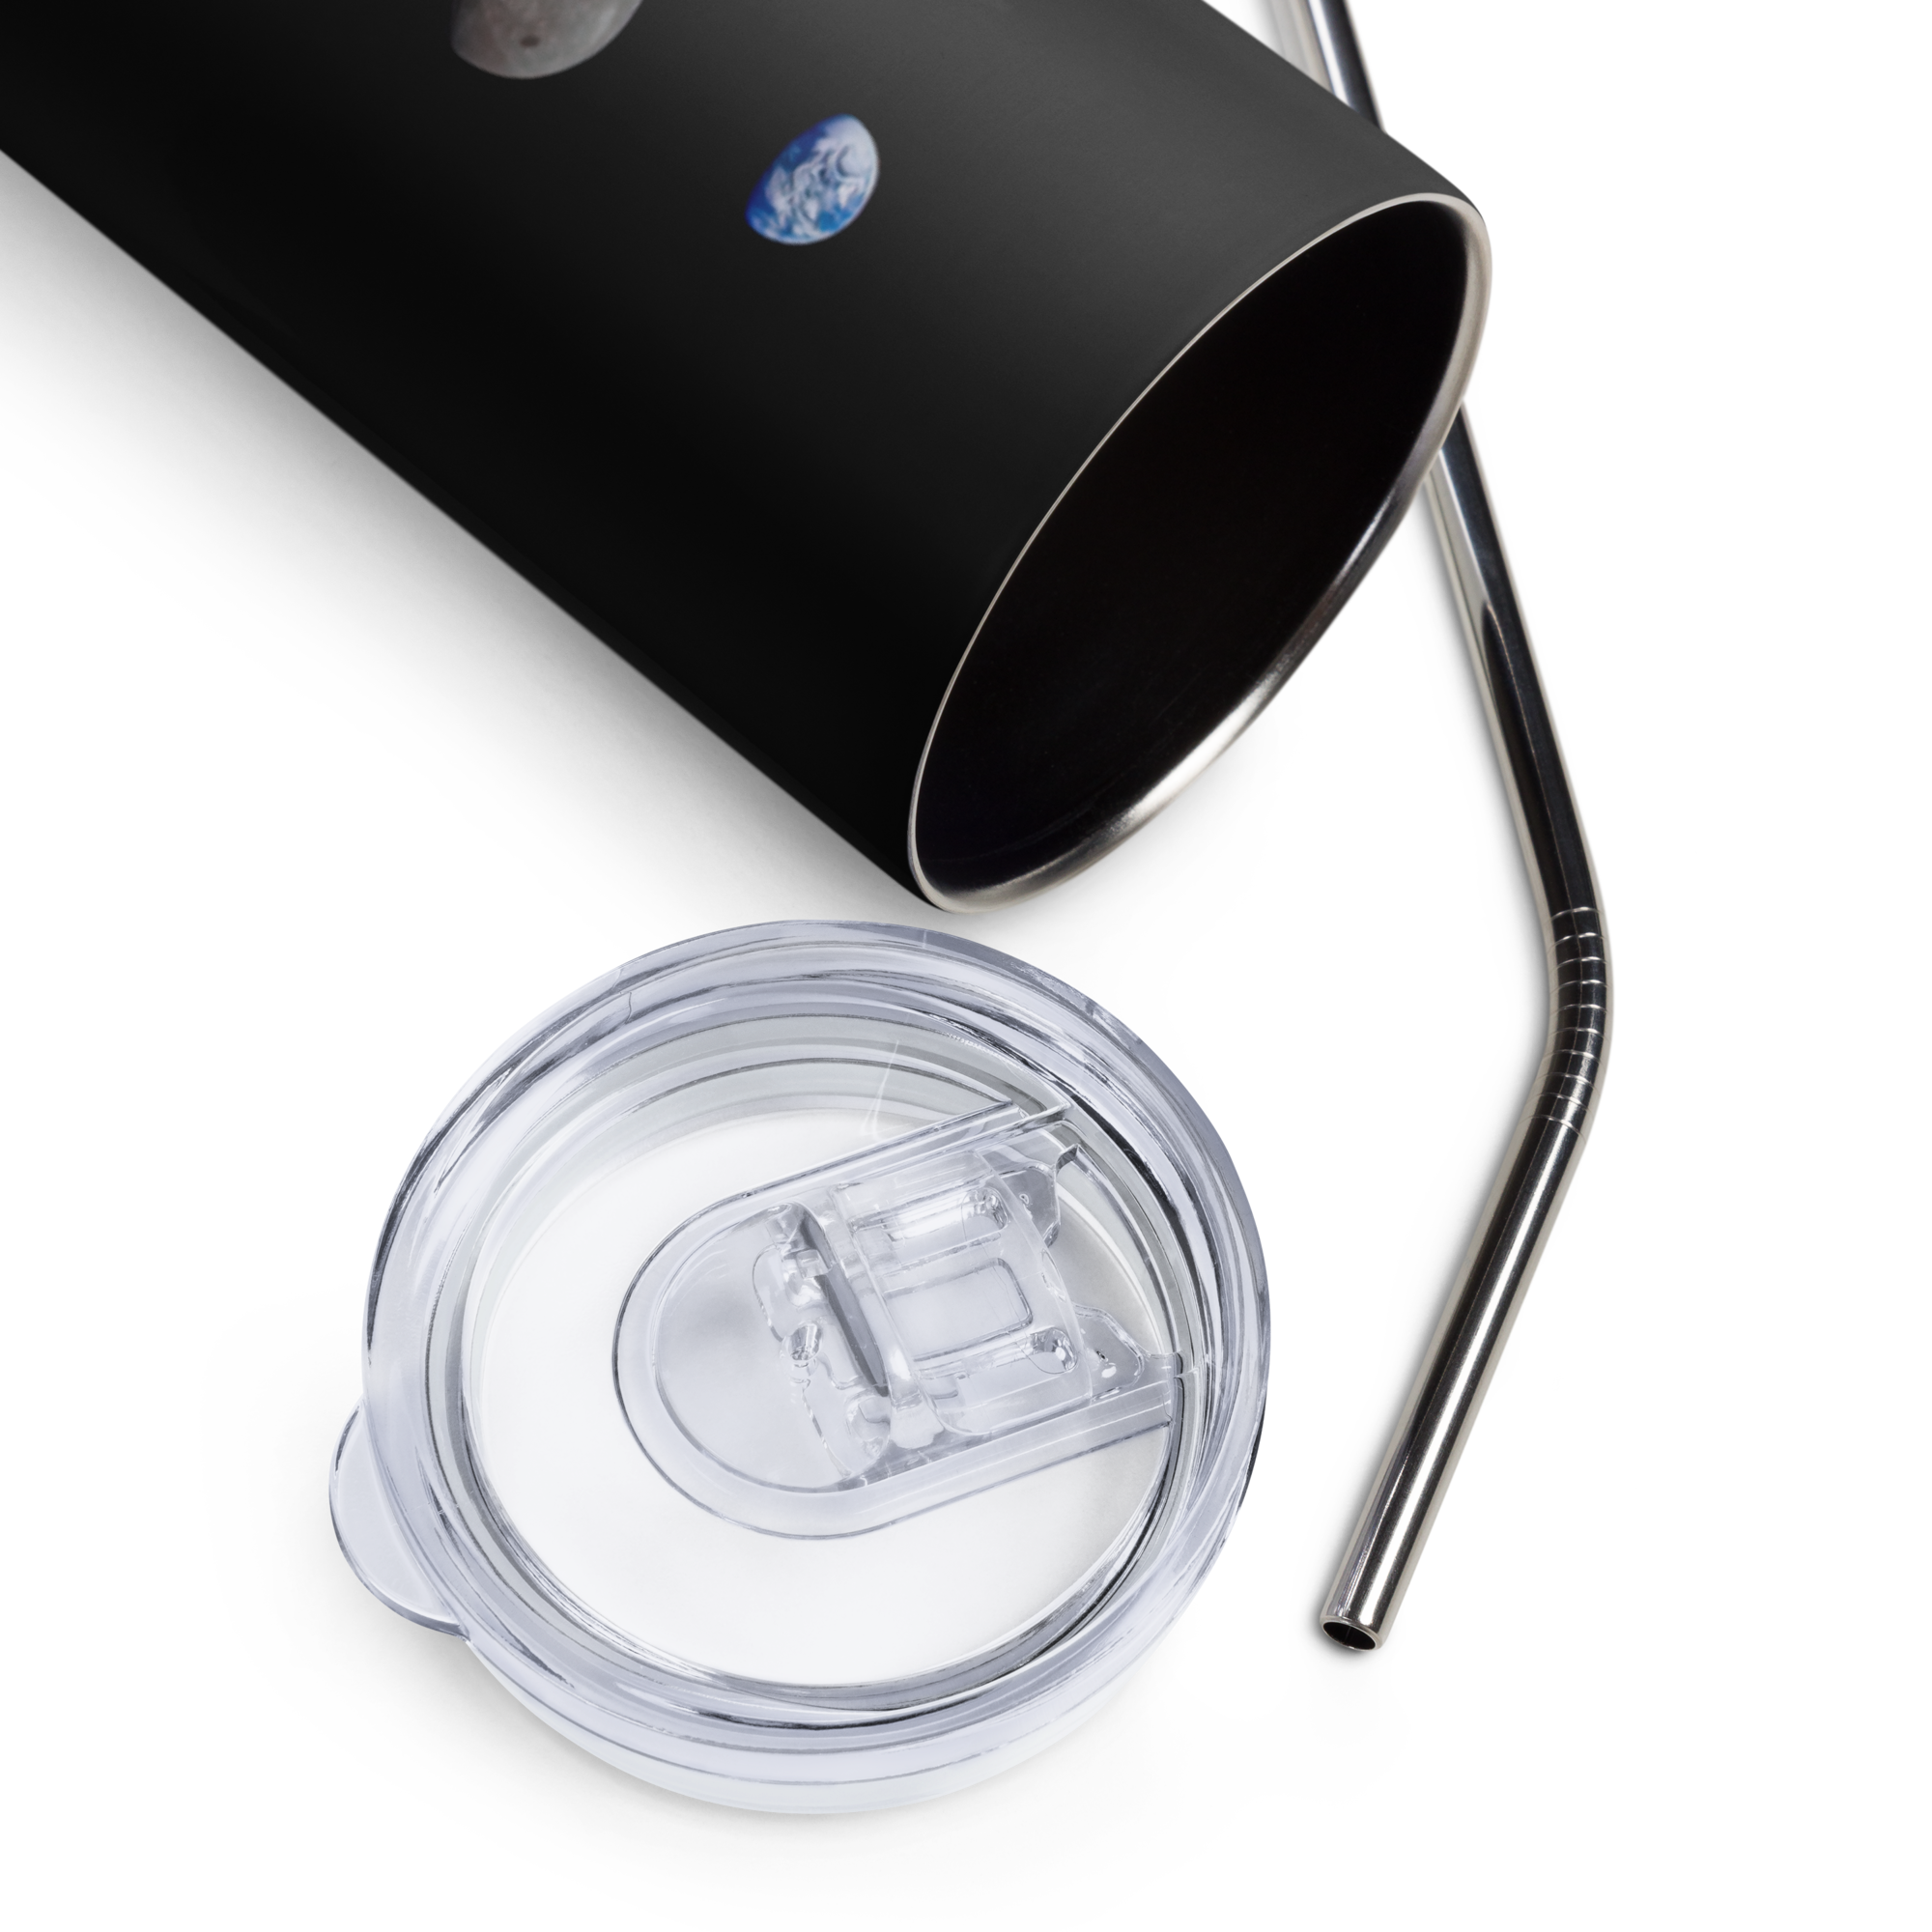 Orion, Earth, and the Moon Stainless Steel Tumbler